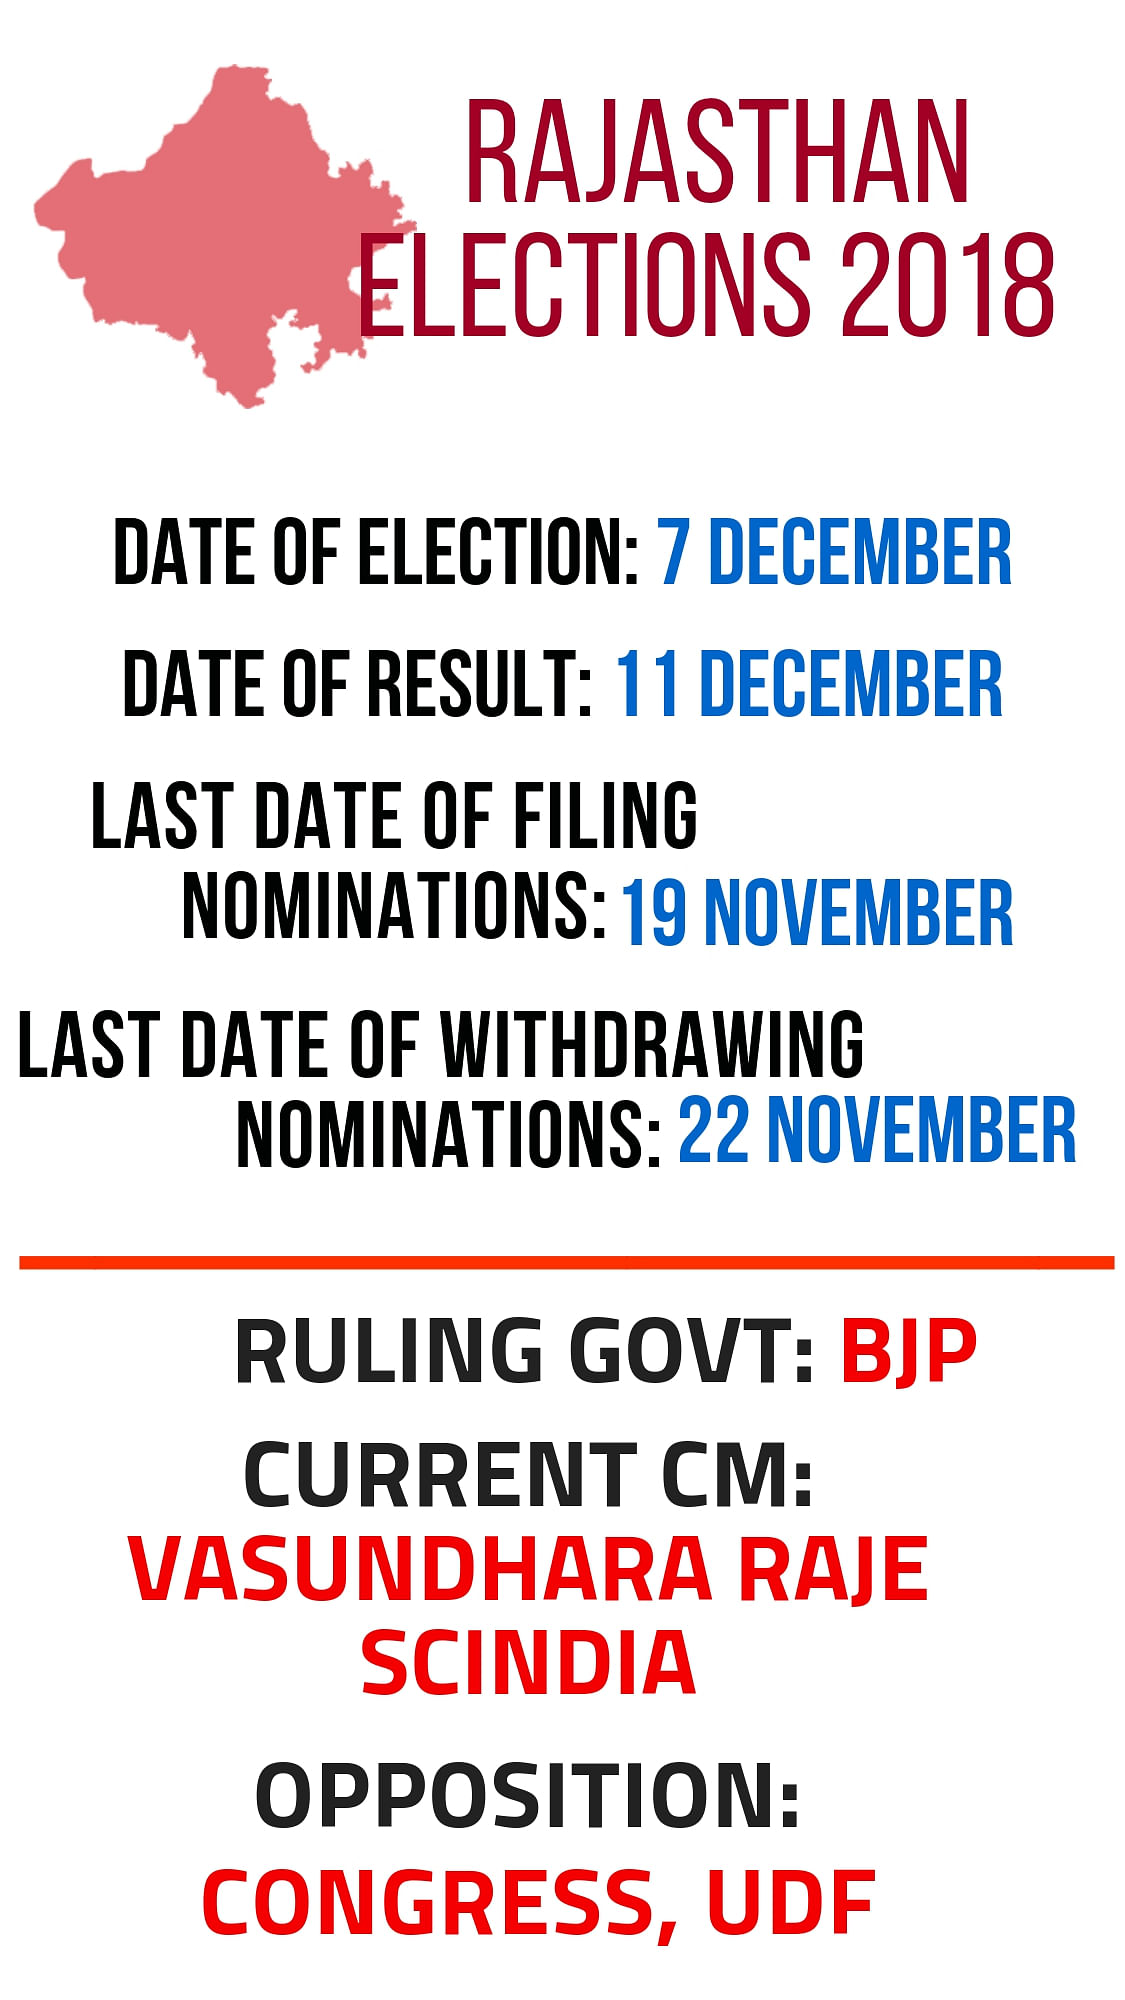 Will Rajasthan break the 20-year trend of switching between  BJP & Congress govts every consecutive term this poll?